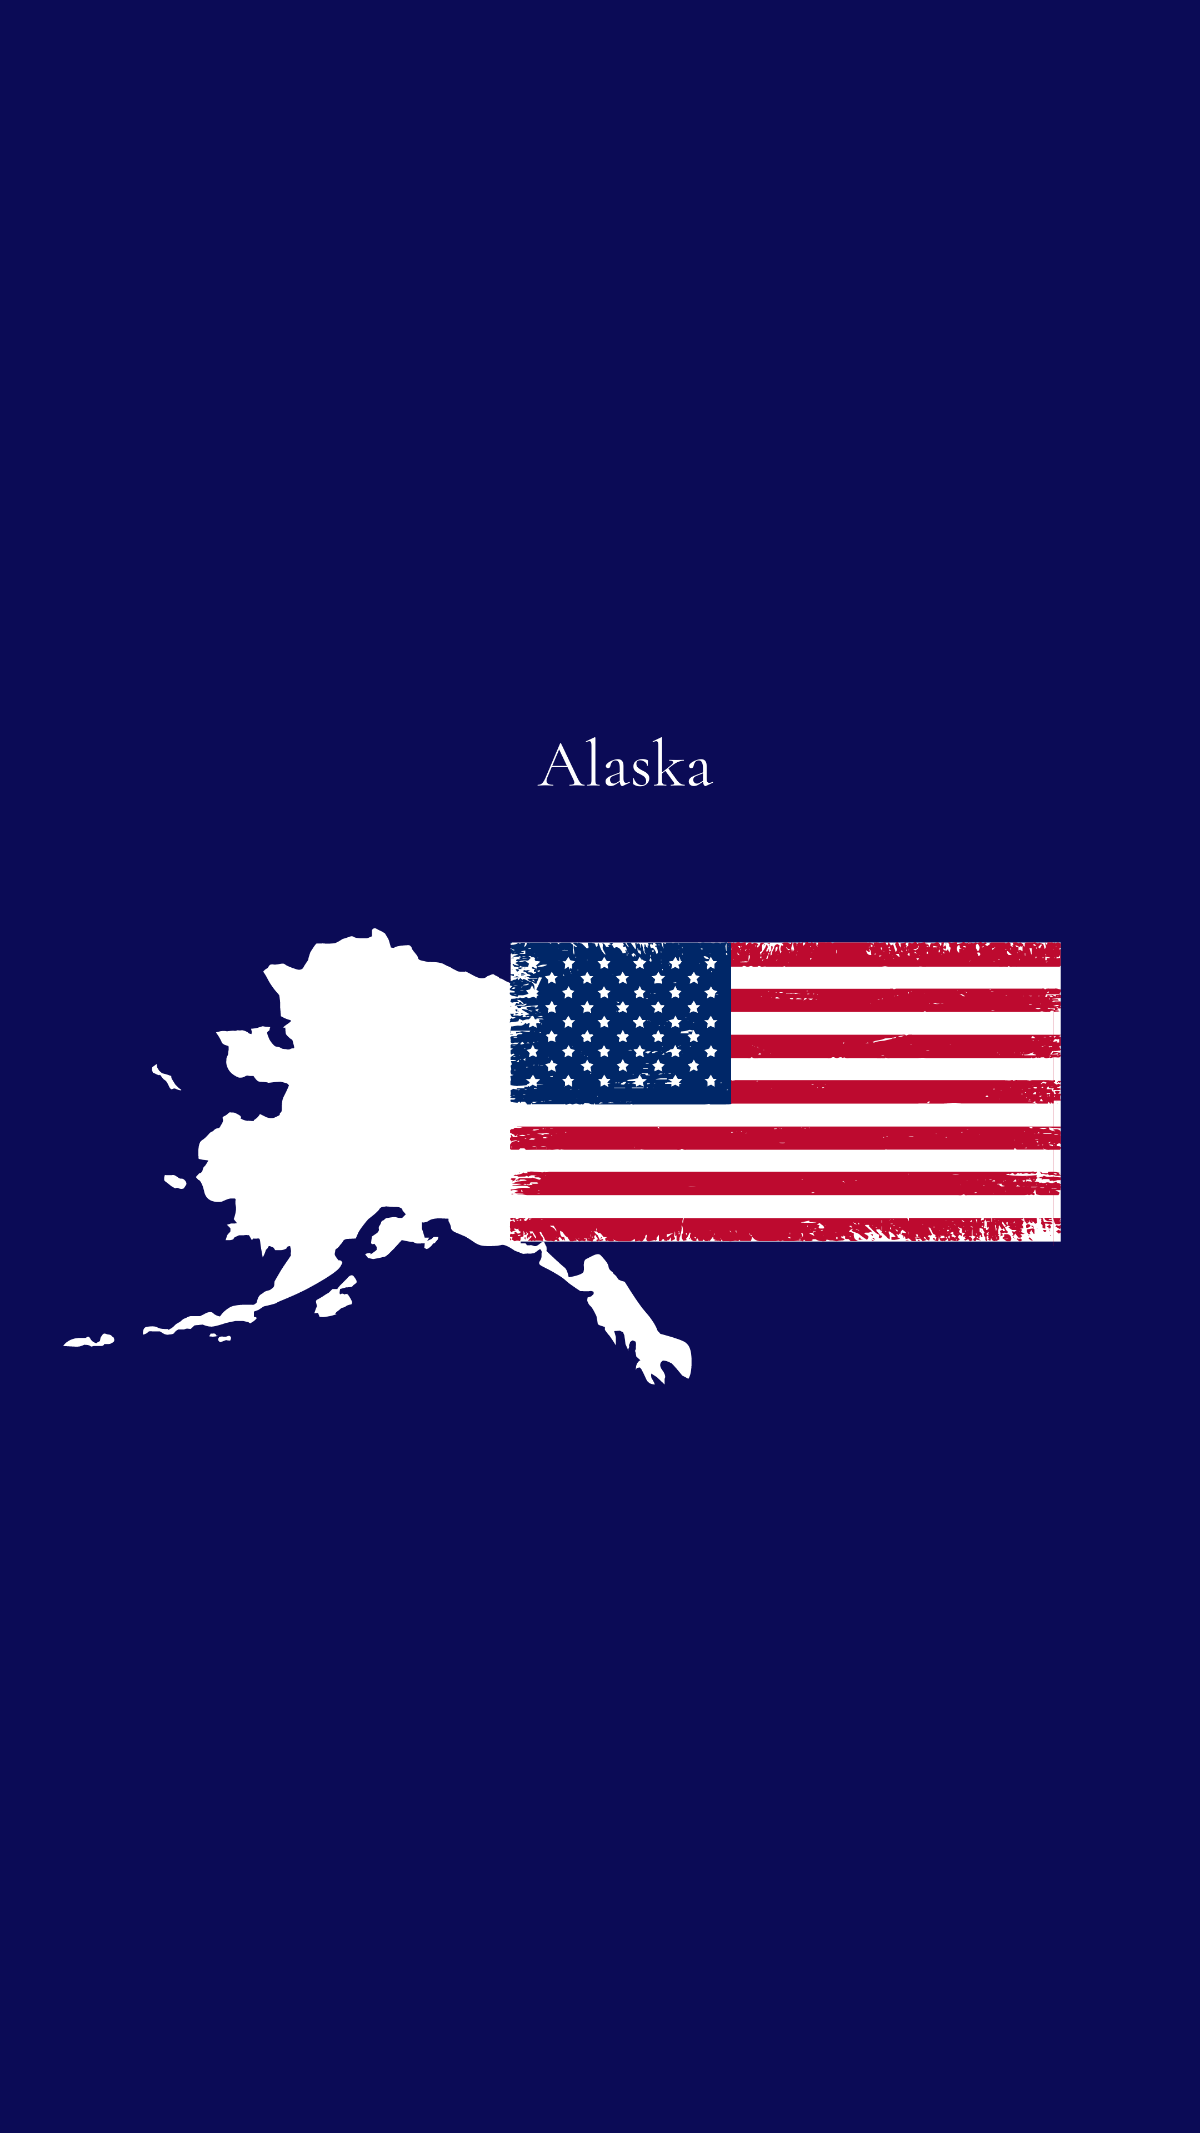 Alaska Day iPhone Background Template